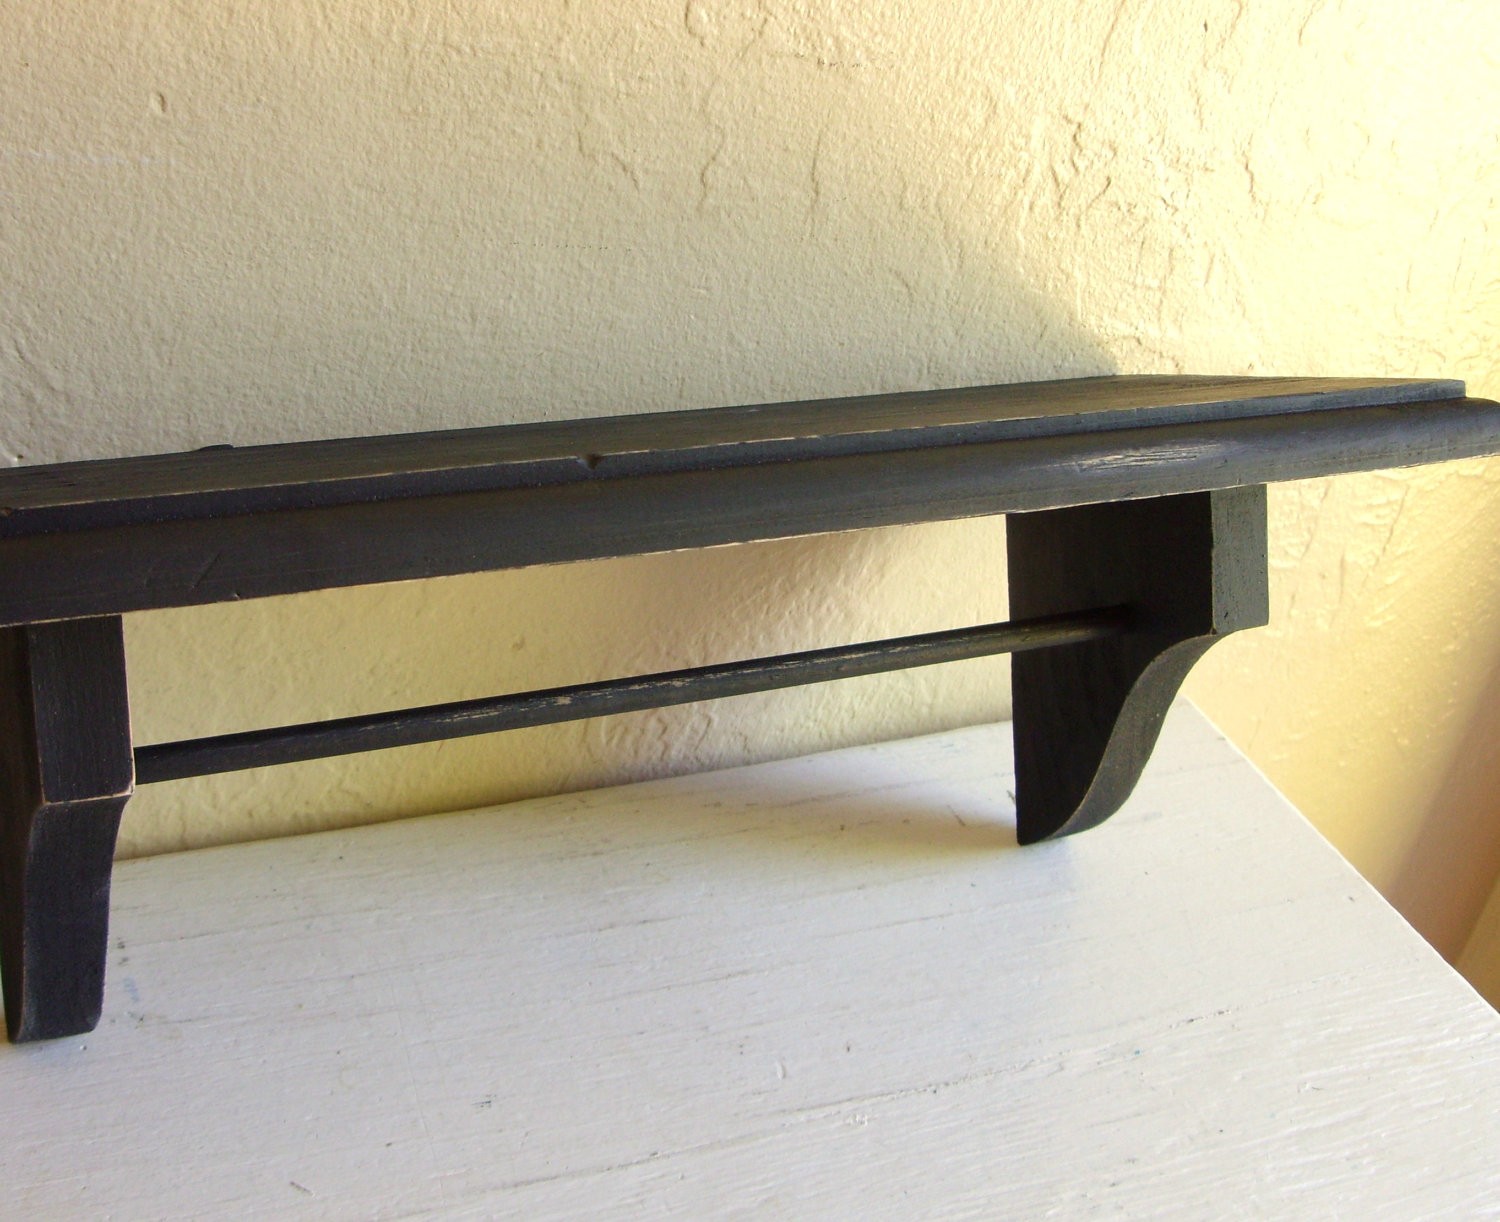 Distressed black wood wall shelf with hanging rod rustic